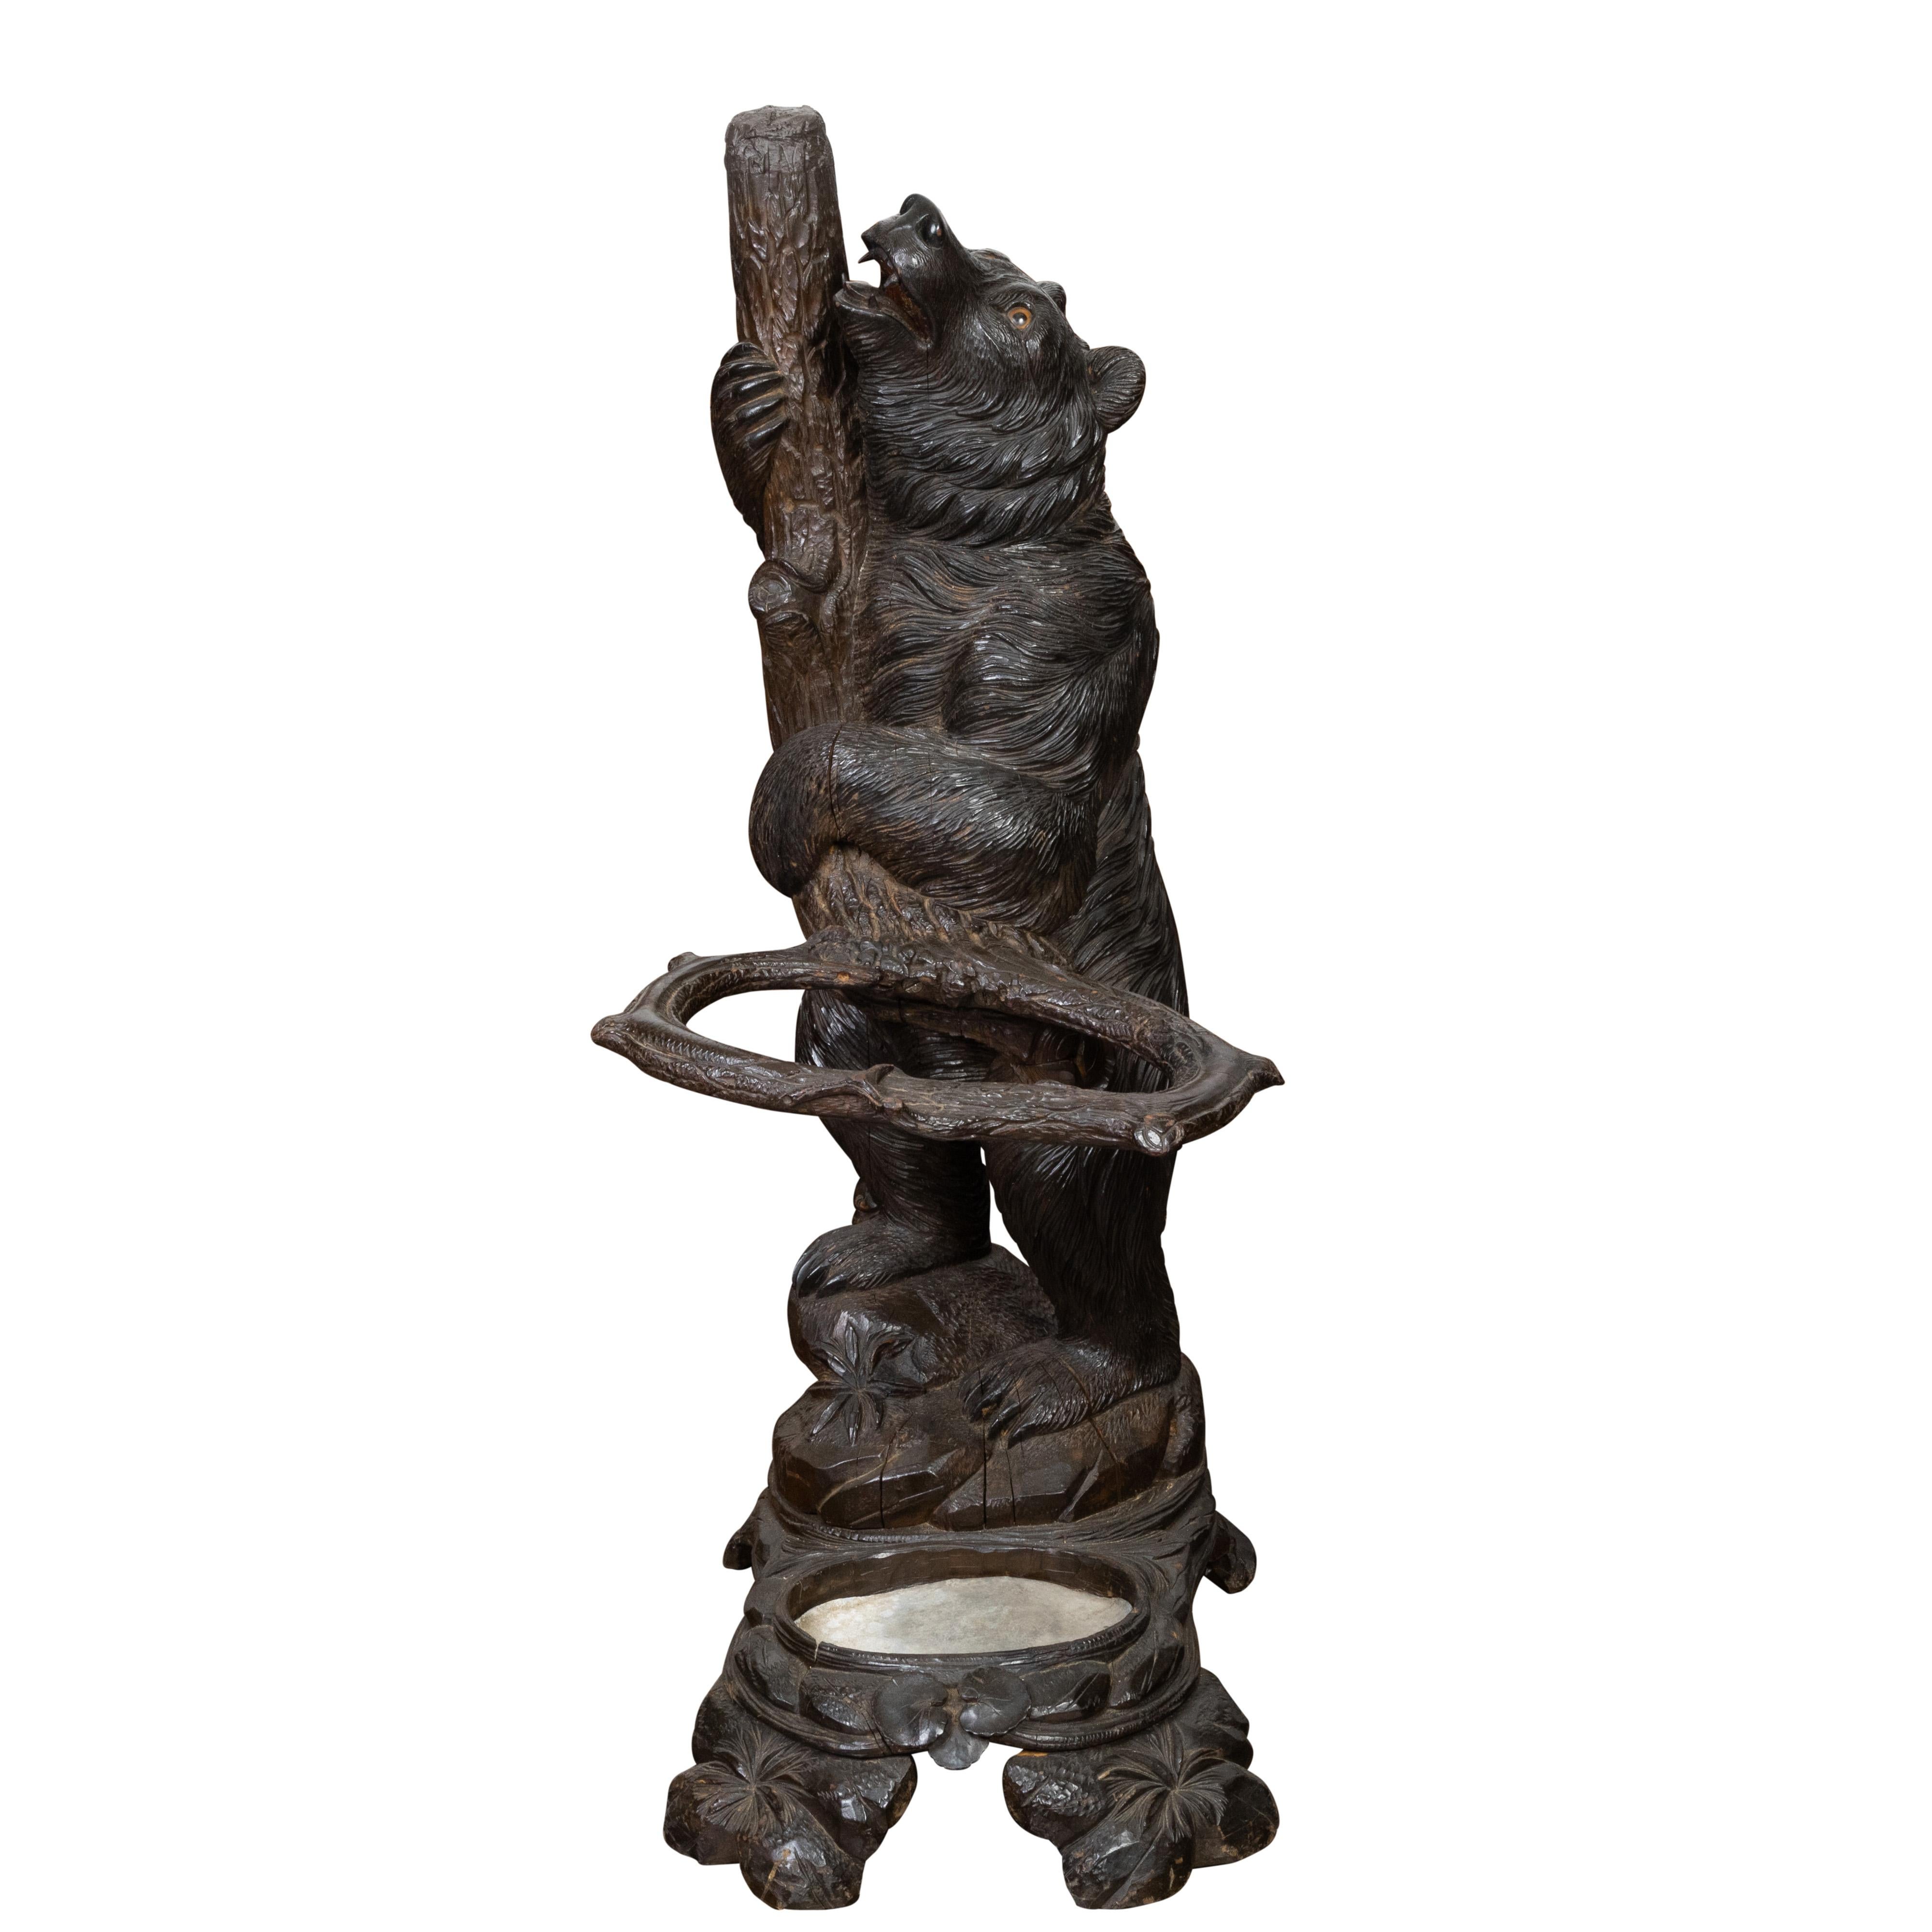 Black Forest 1890s Carved Wooden Umbrella Stand Depicting a Bear Climbing a Tree